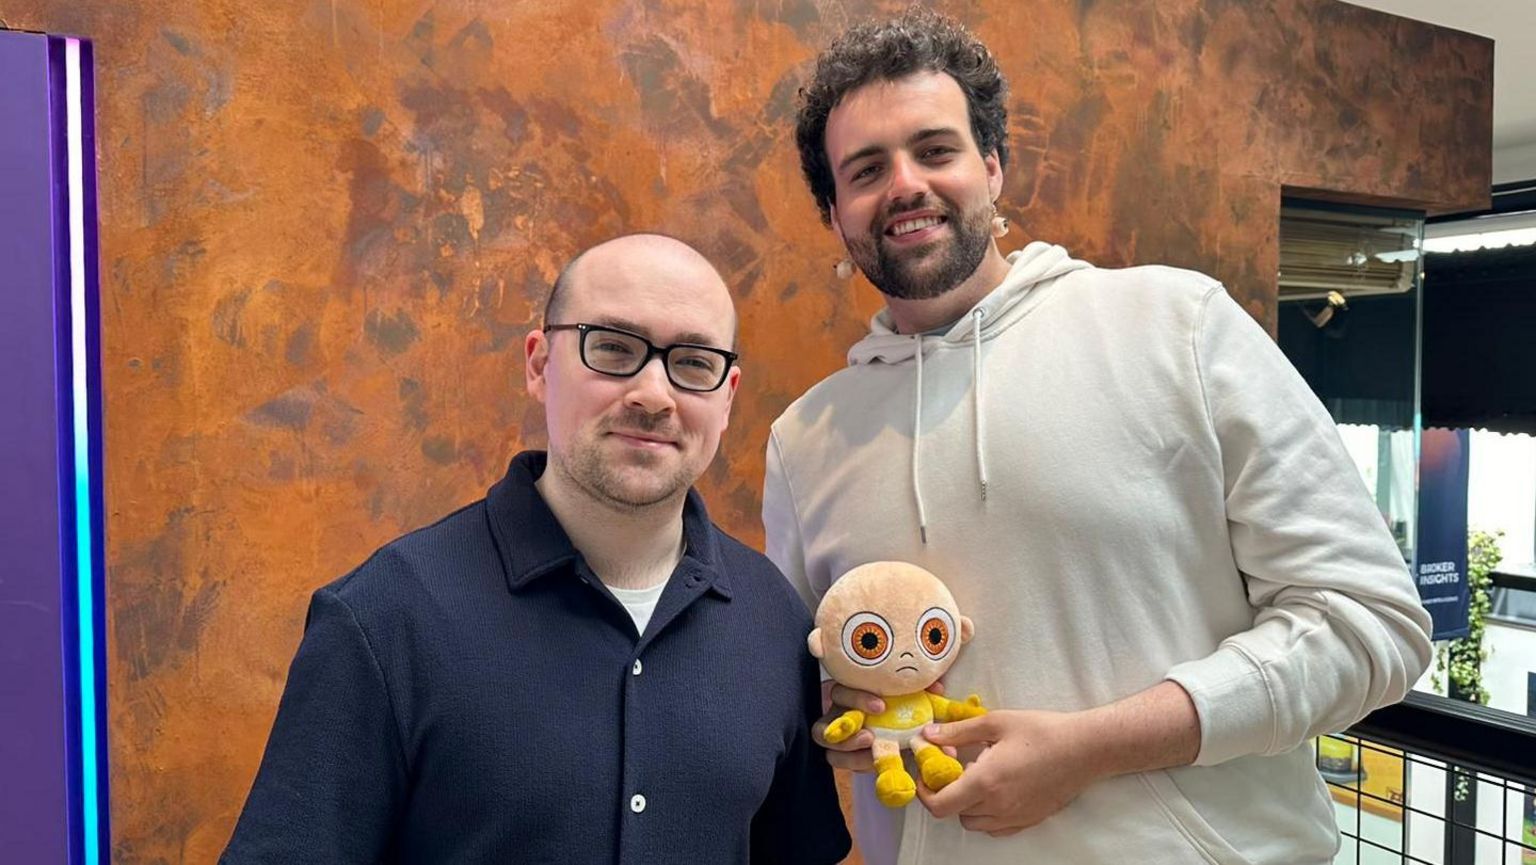 A man with glasses and a shaved head in a blue shirt stands next to a taller man with curly hair who wears a cream-coloured hoodie. Both are smiling, and the taller man is holding a baby soft toy with large yellow eyes.